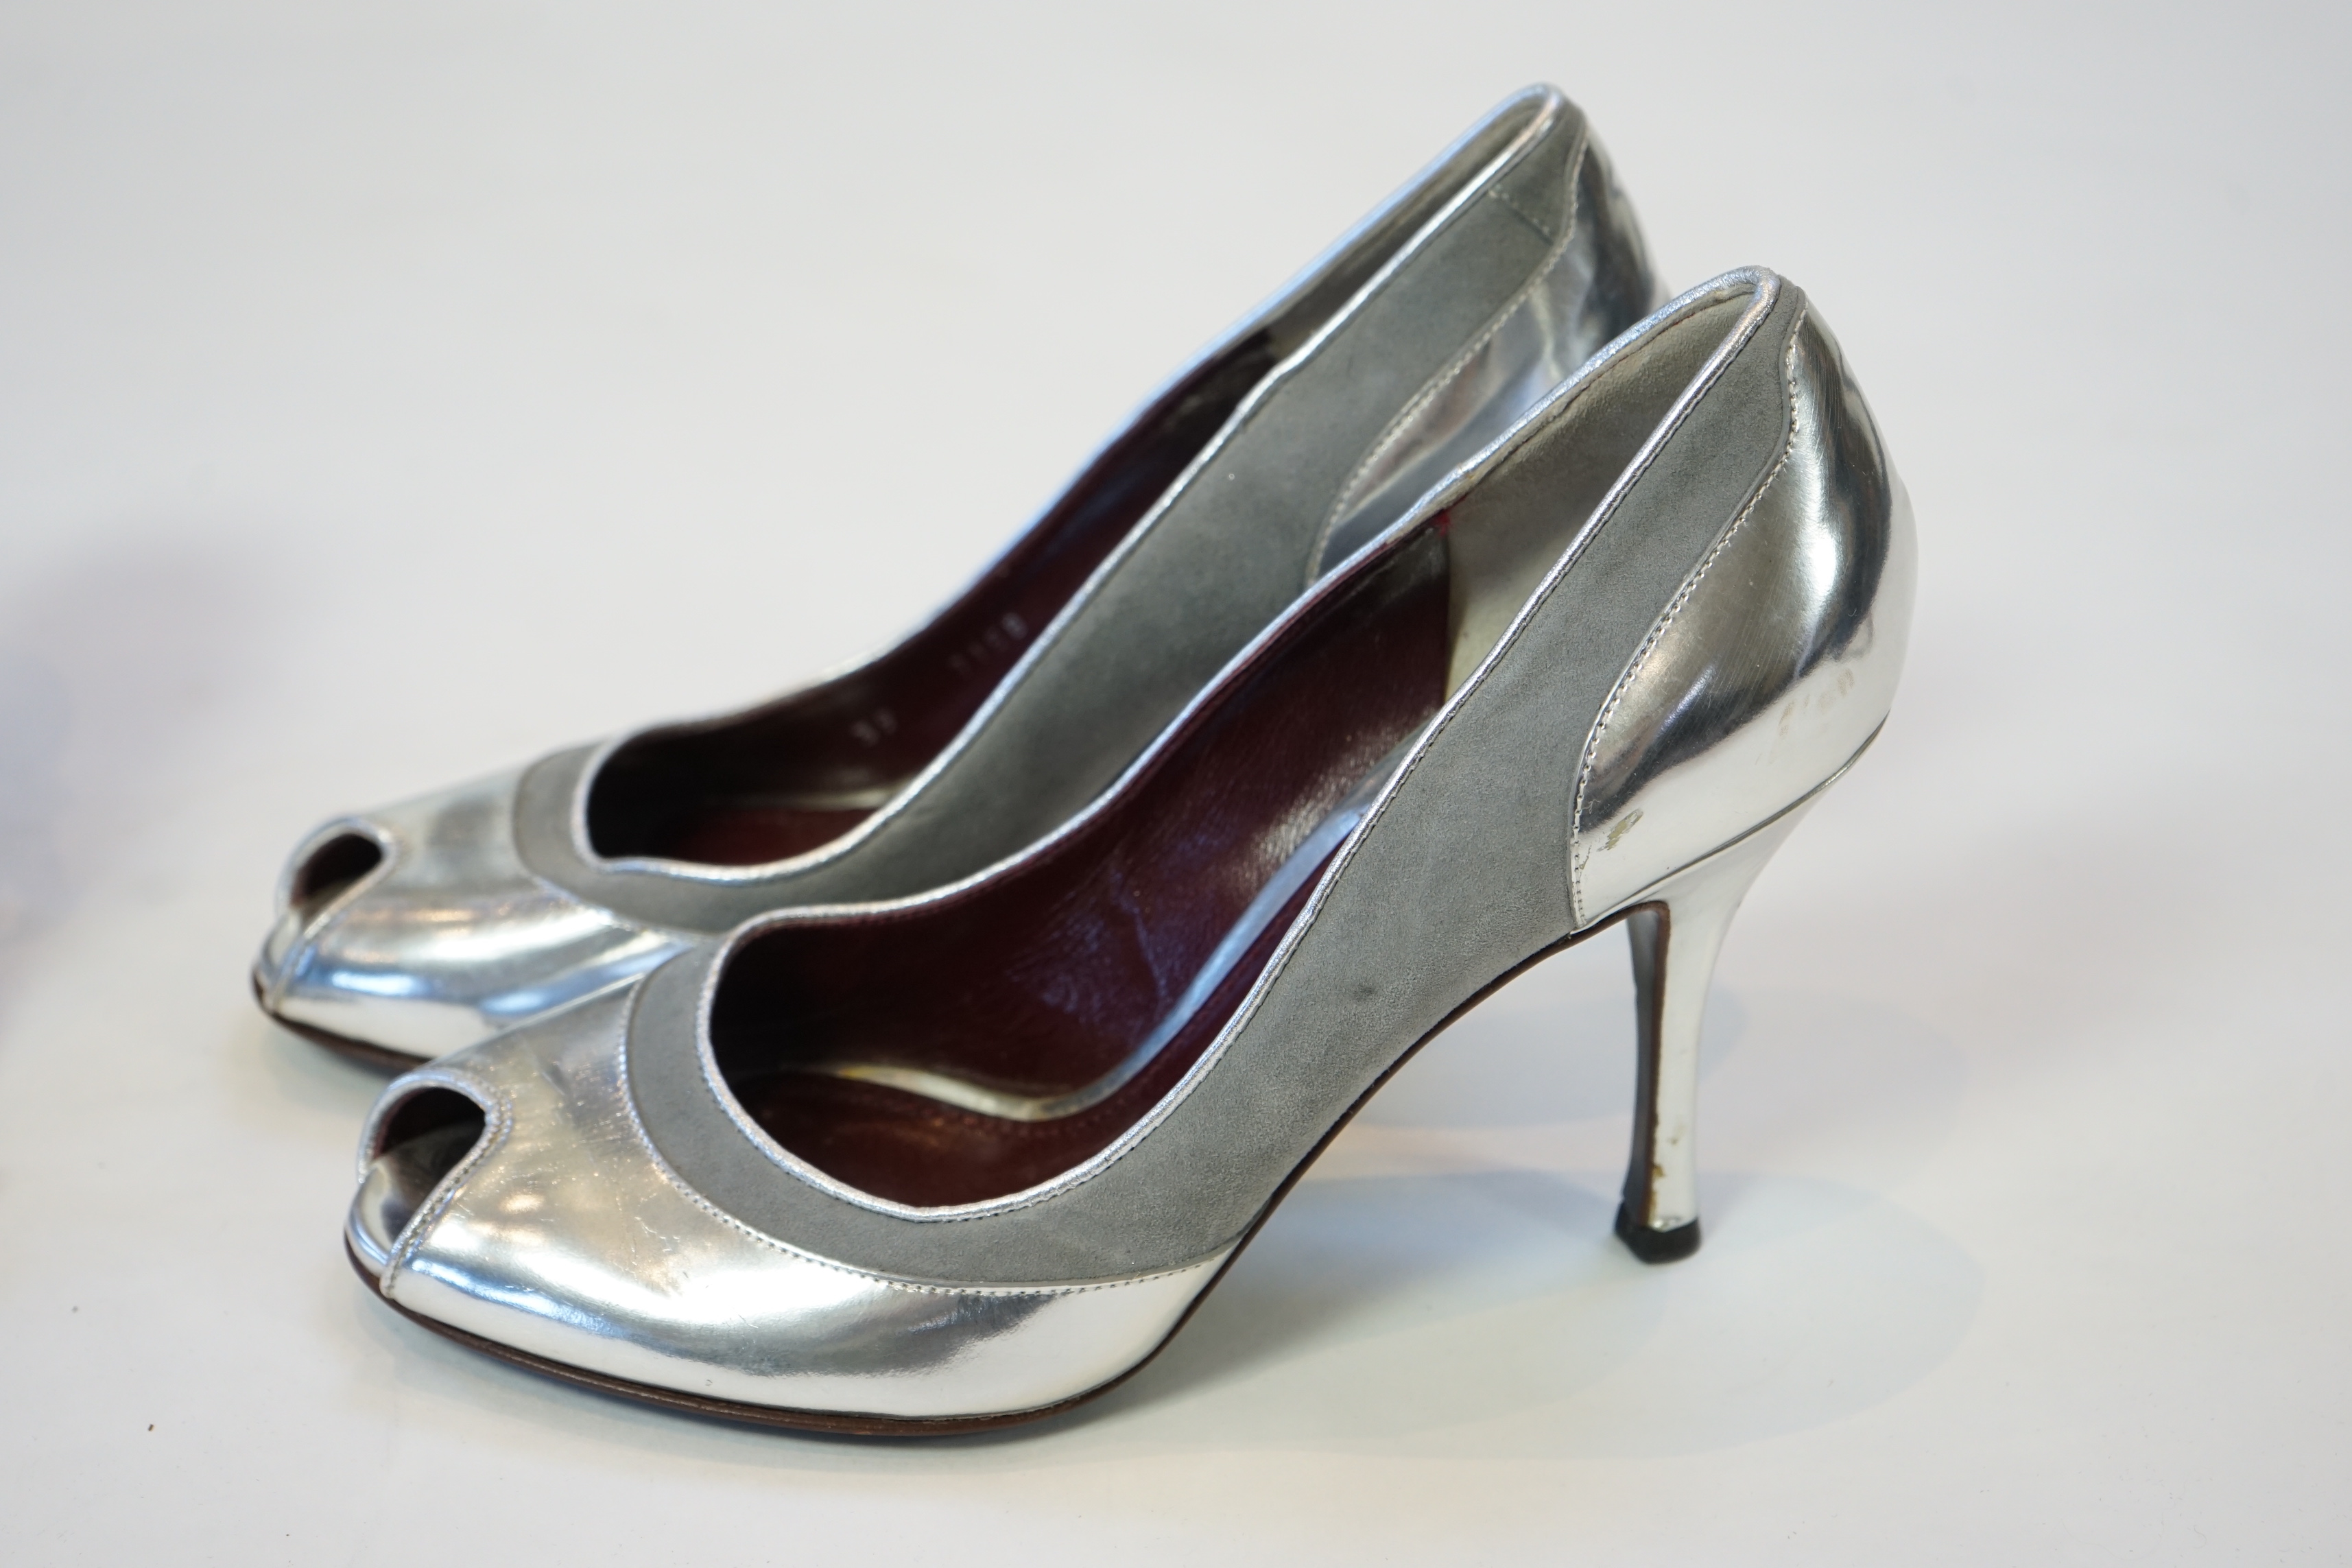 A pair of Fendi lady's metallic silver sandals with three diamante circle detail and a pair of Dolce and Gabbana silver patent leather and suede peep toe heels, size EU 39/40